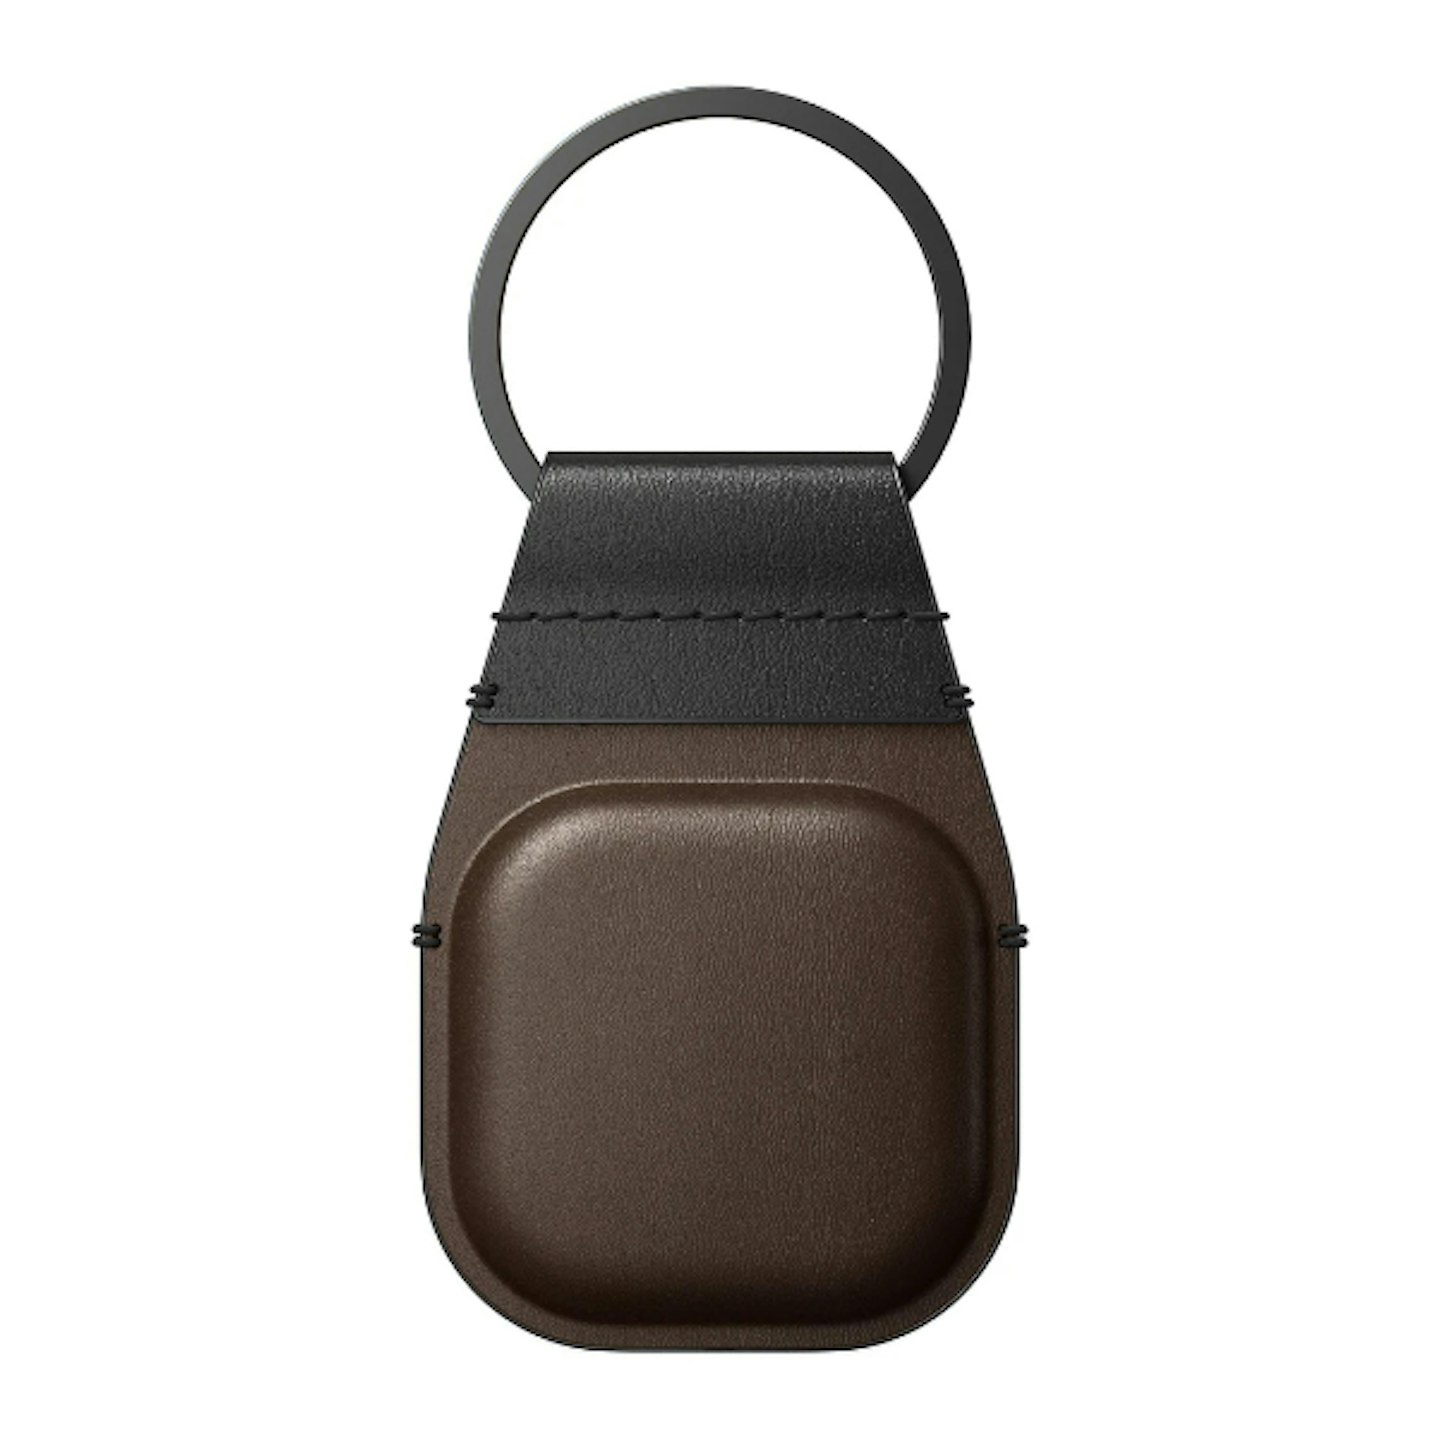 Nomad Leather AirTag Keychain with Horween Leather